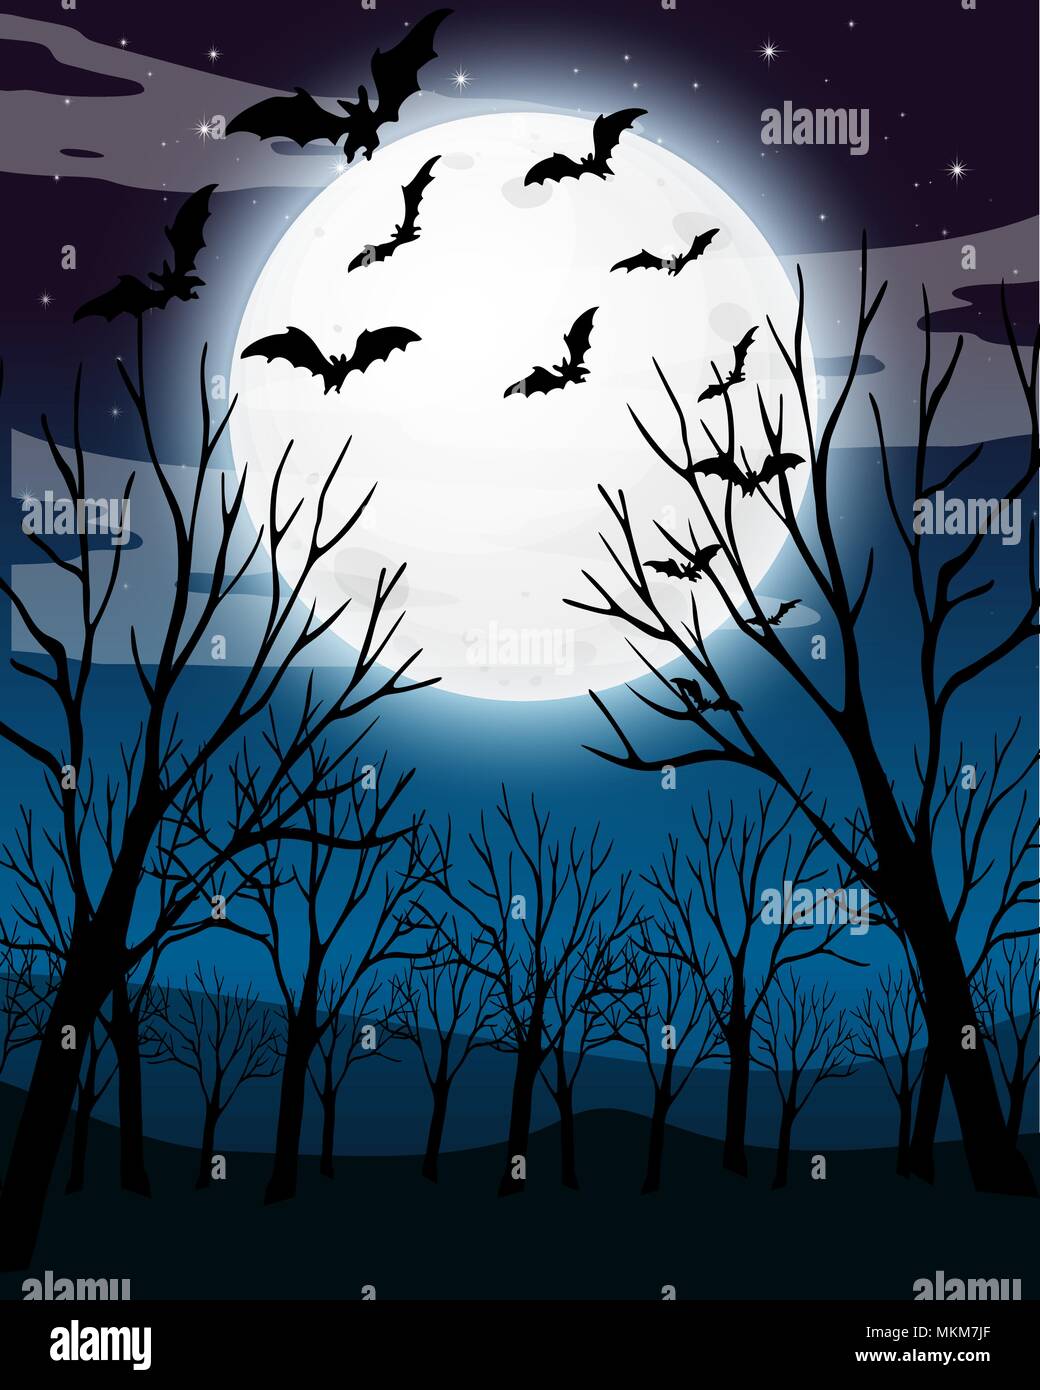 Scary Dark Night Forest Background illustration Stock Vector Image ...